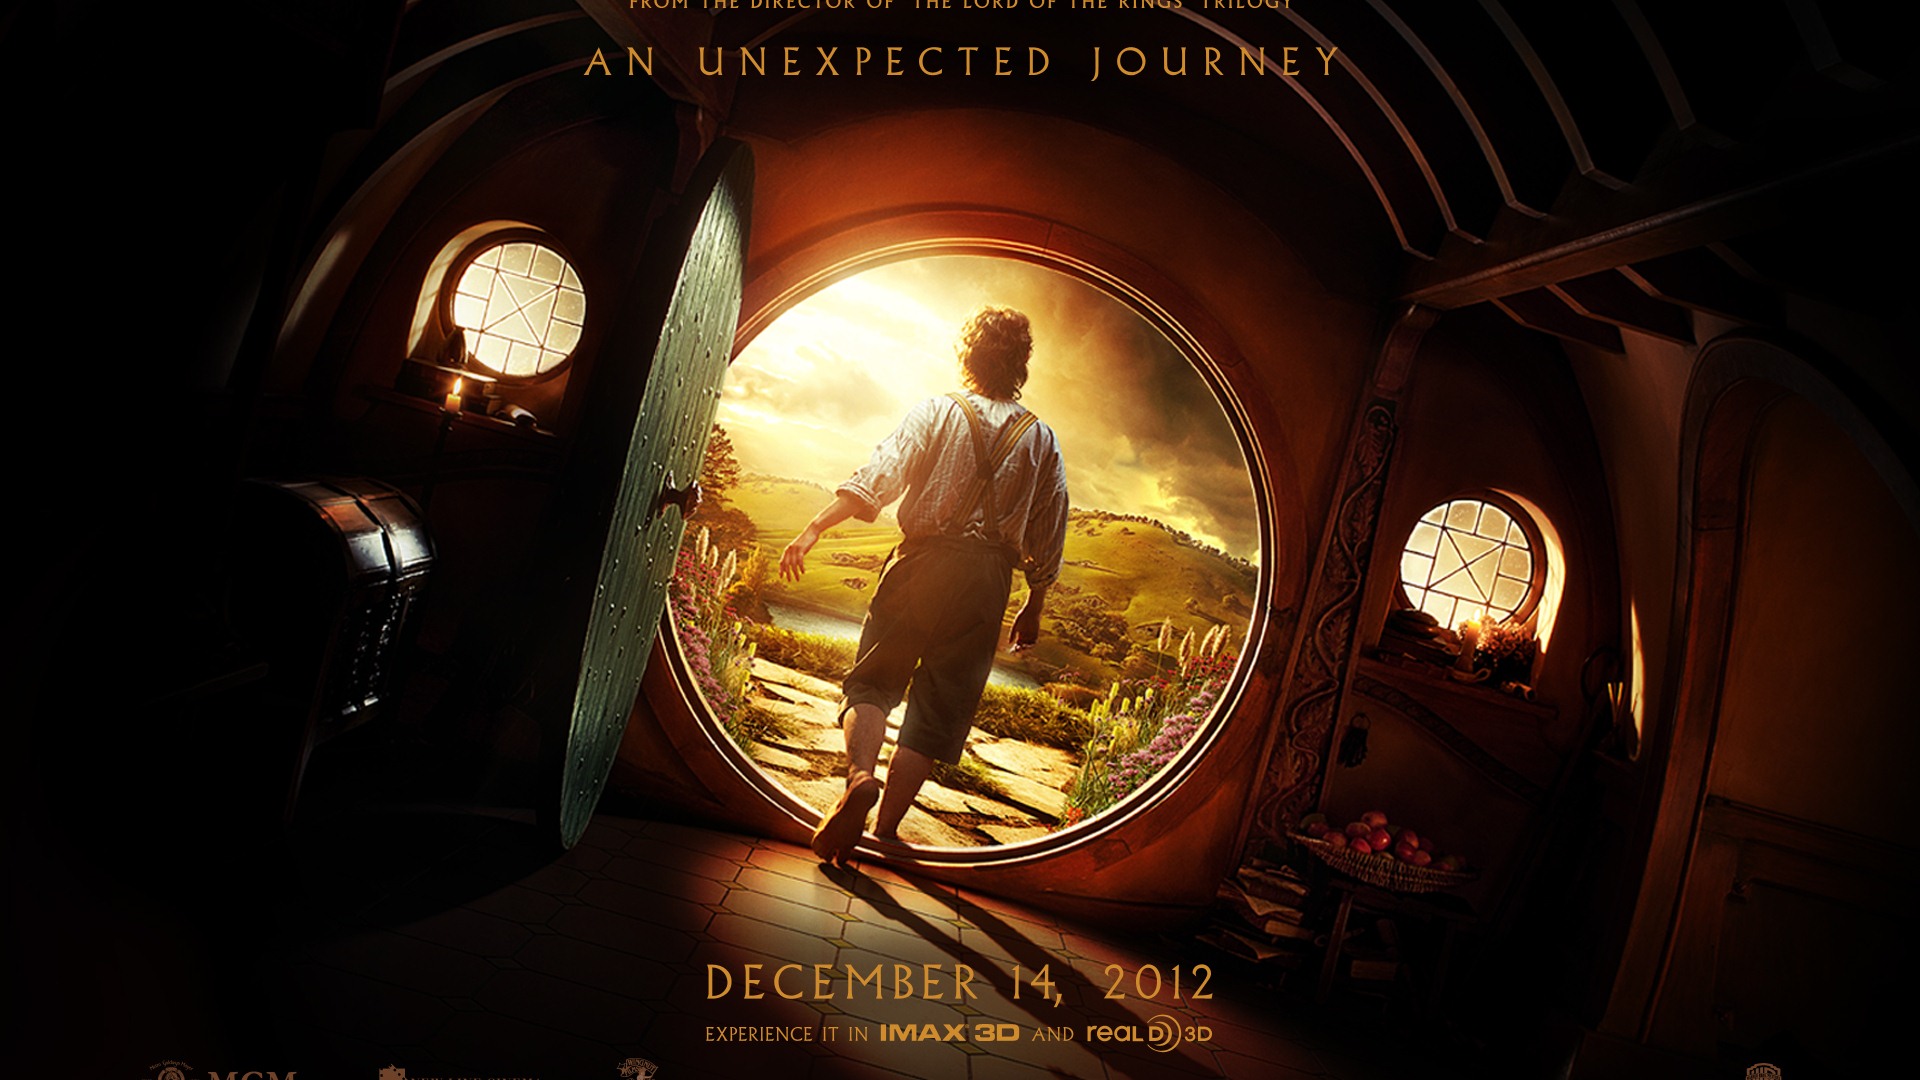 The Hobbit: An Unexpected Journey HD wallpapers #15 - 1920x1080